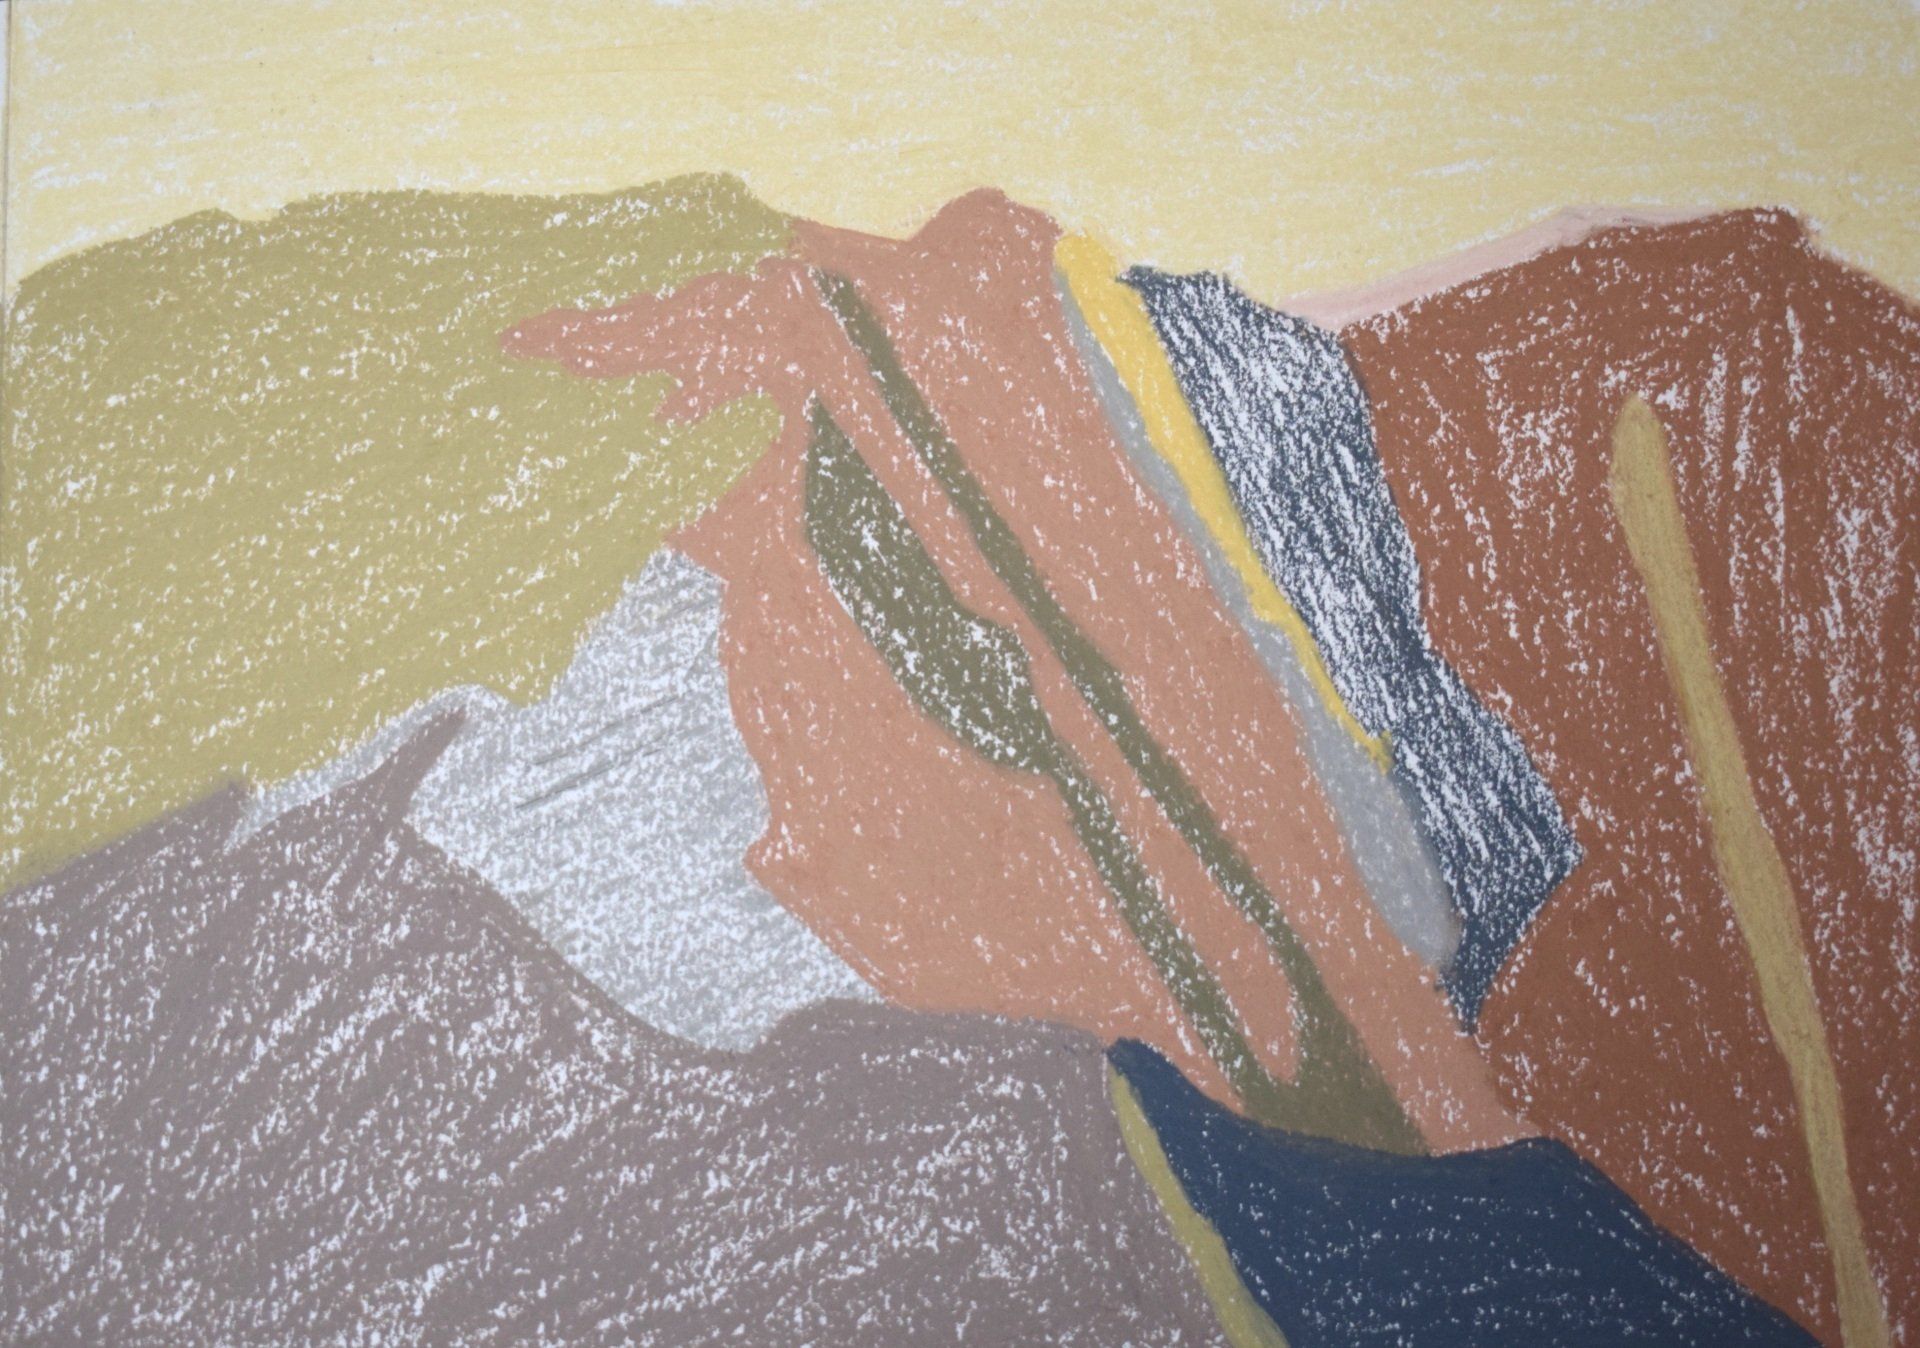 Abstract drawing of mountain with pink, green, brown and purple shapes